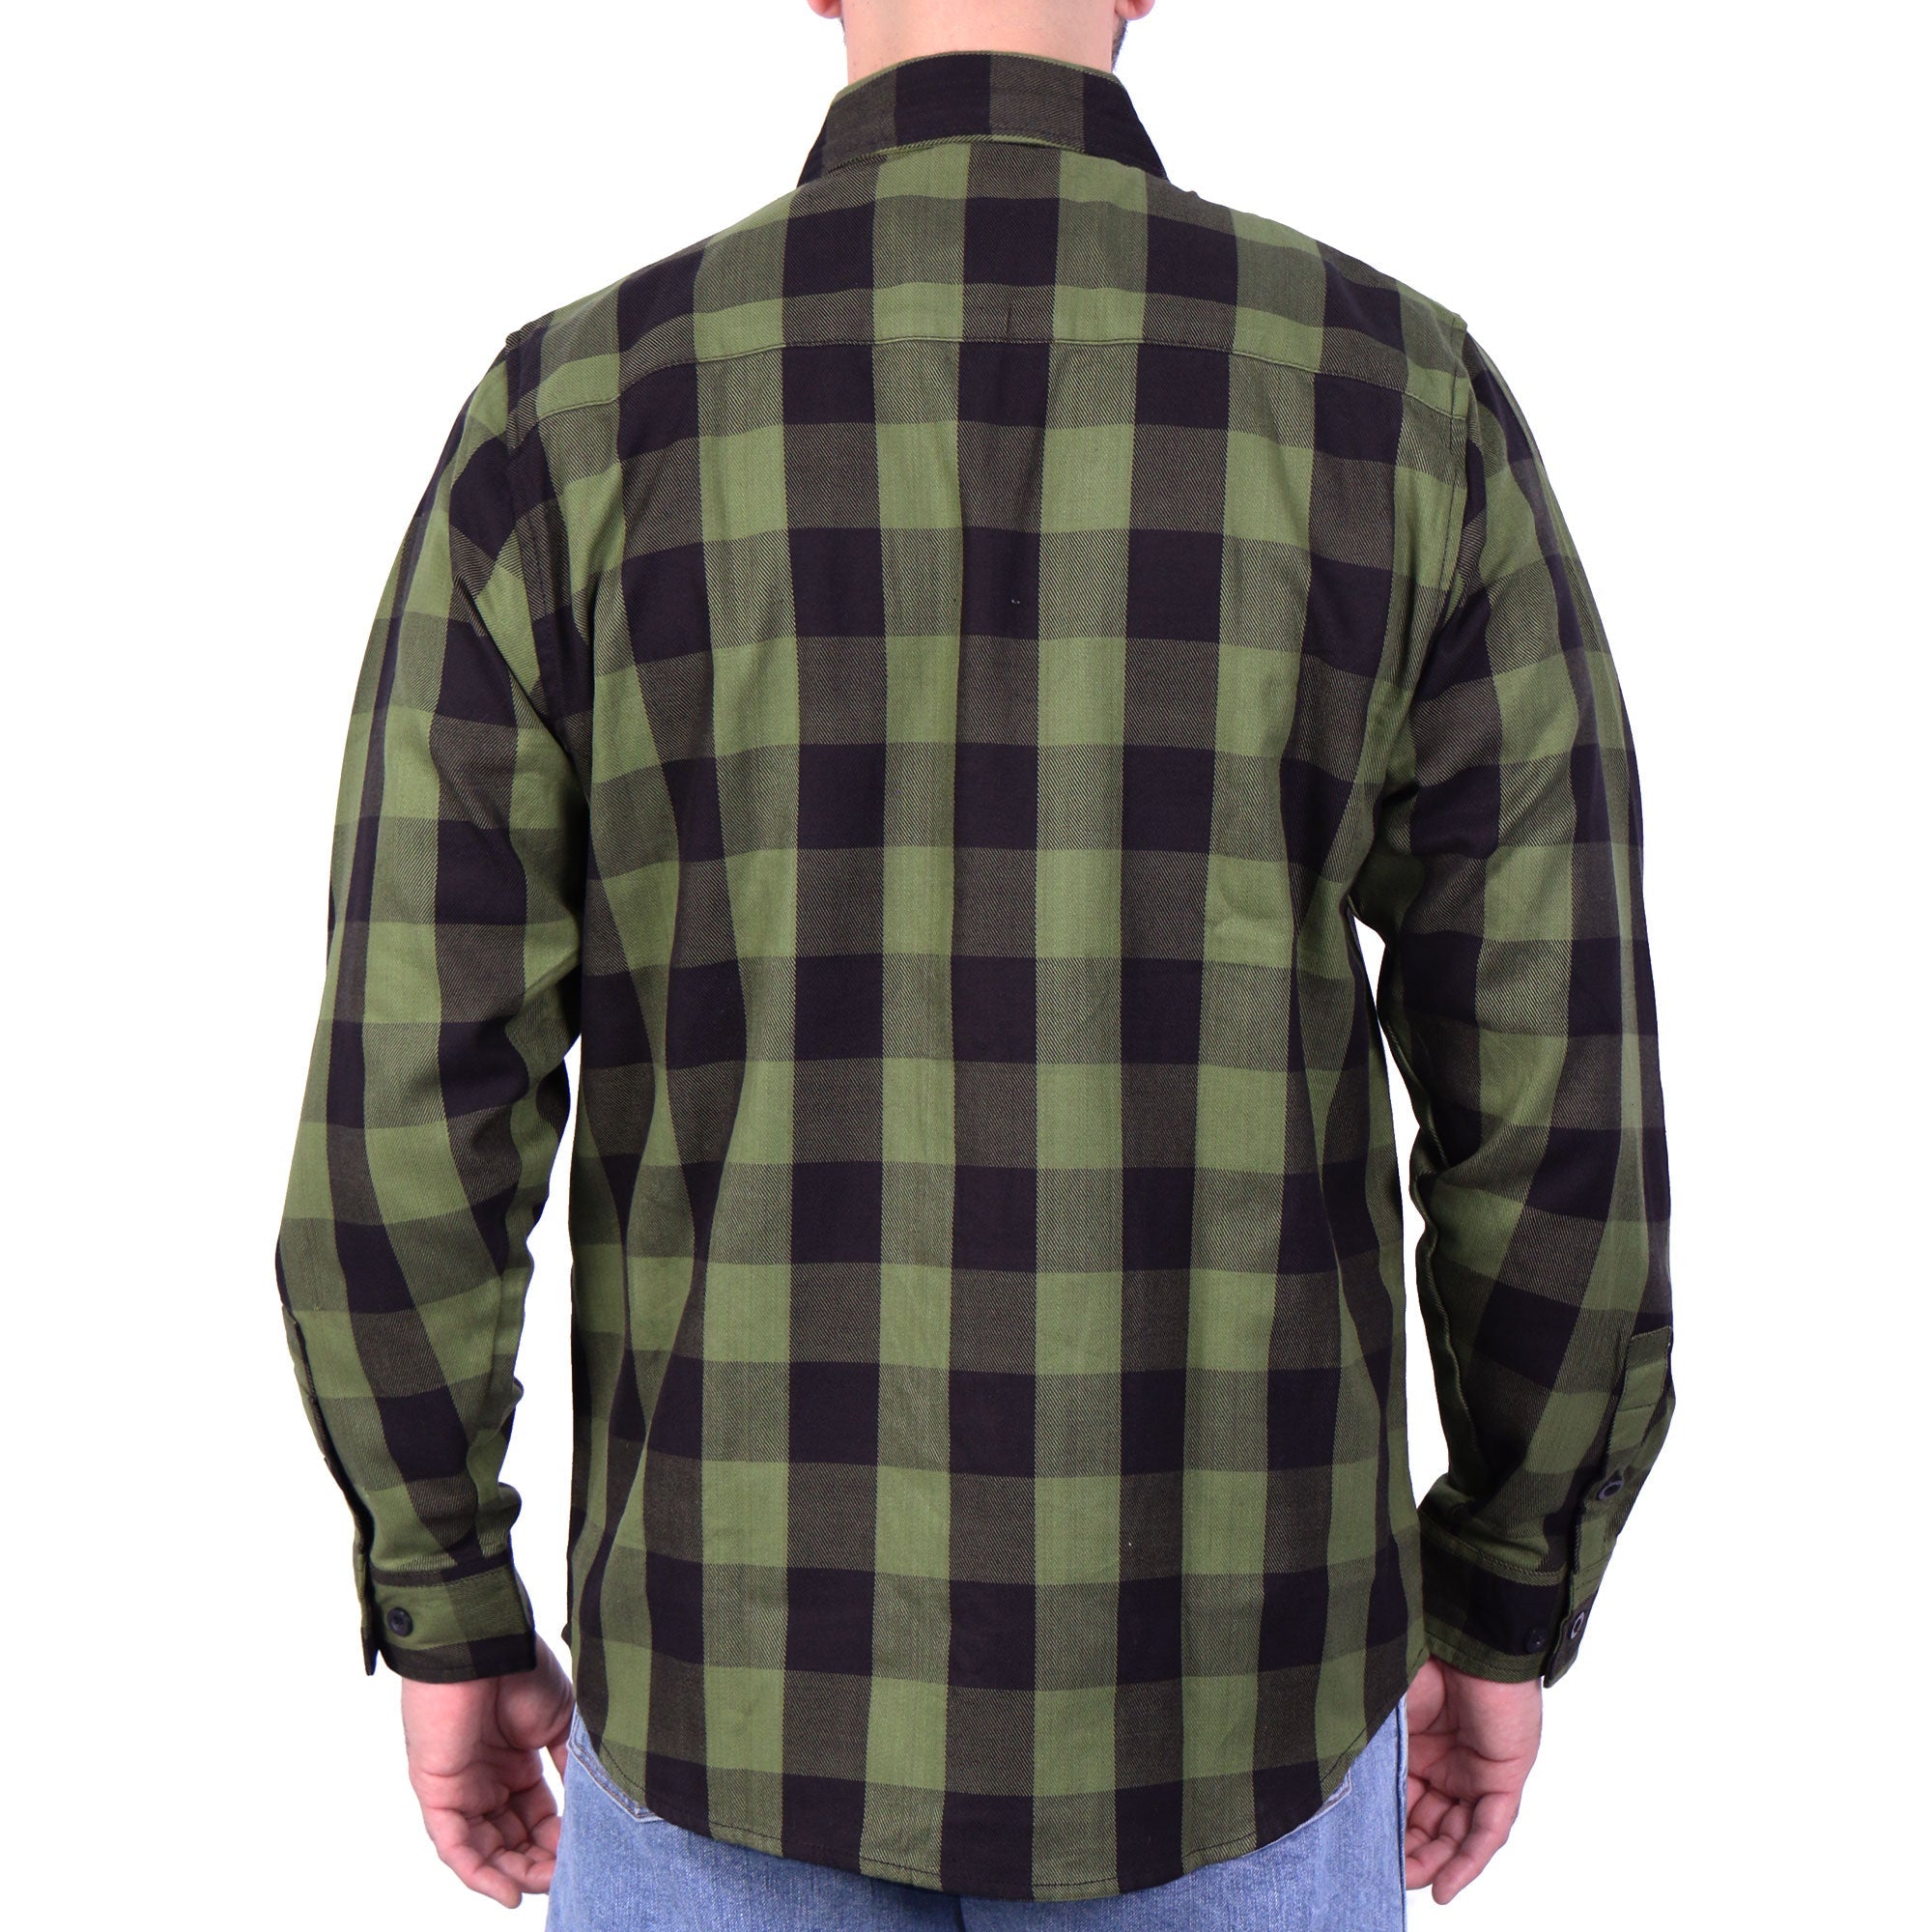 Hot Leathers Long Sleeve OD Green and Black Flannel